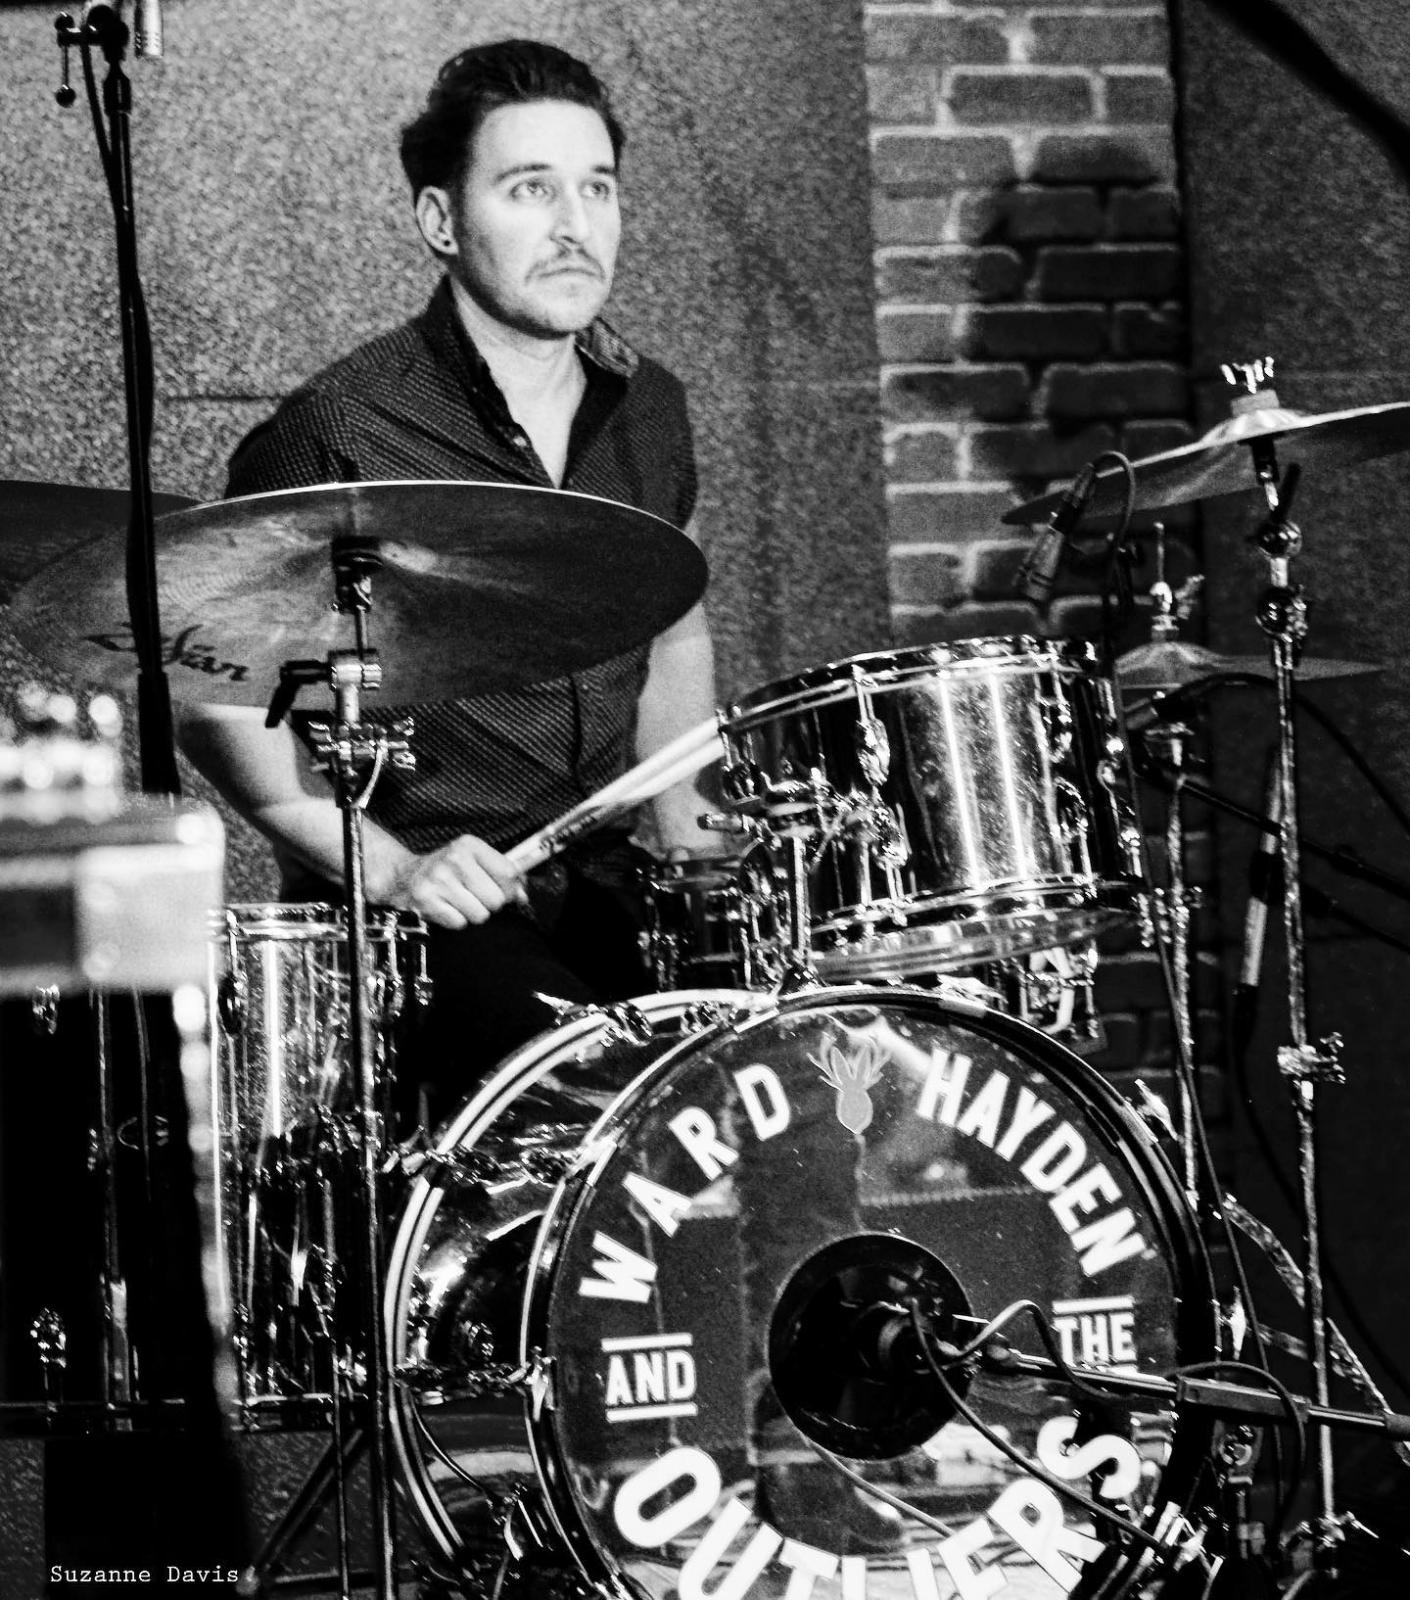 Manin button up tee plays drums in black and white image